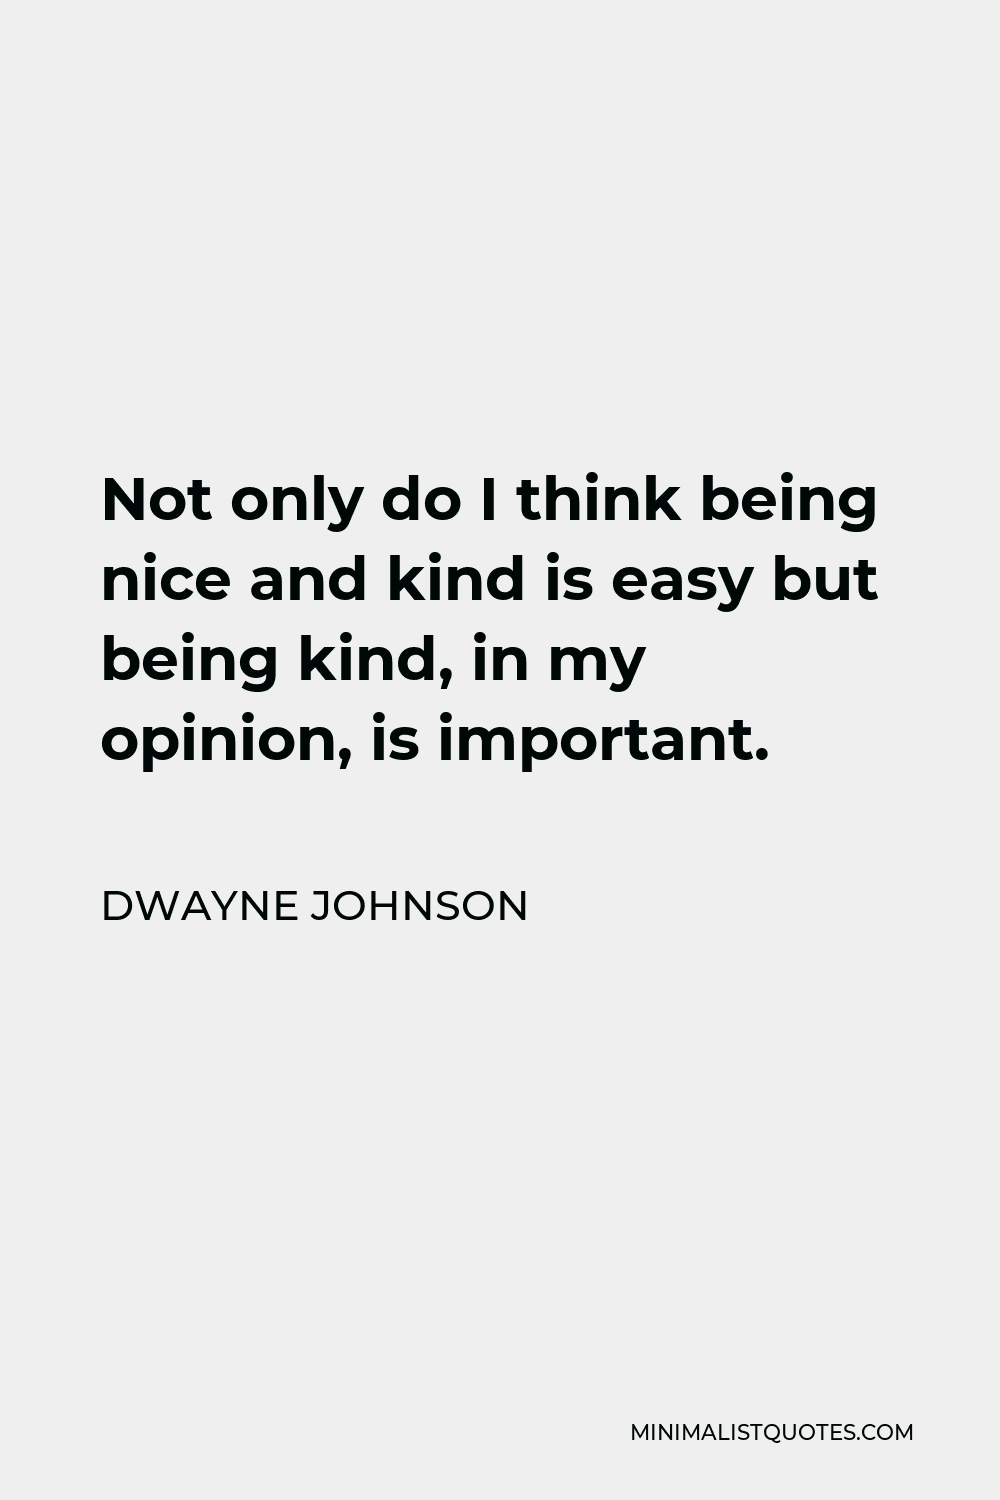 Dwayne Johnson Quote - Not only do I think being nice and kind is easy but being kind, in my opinion, is important.